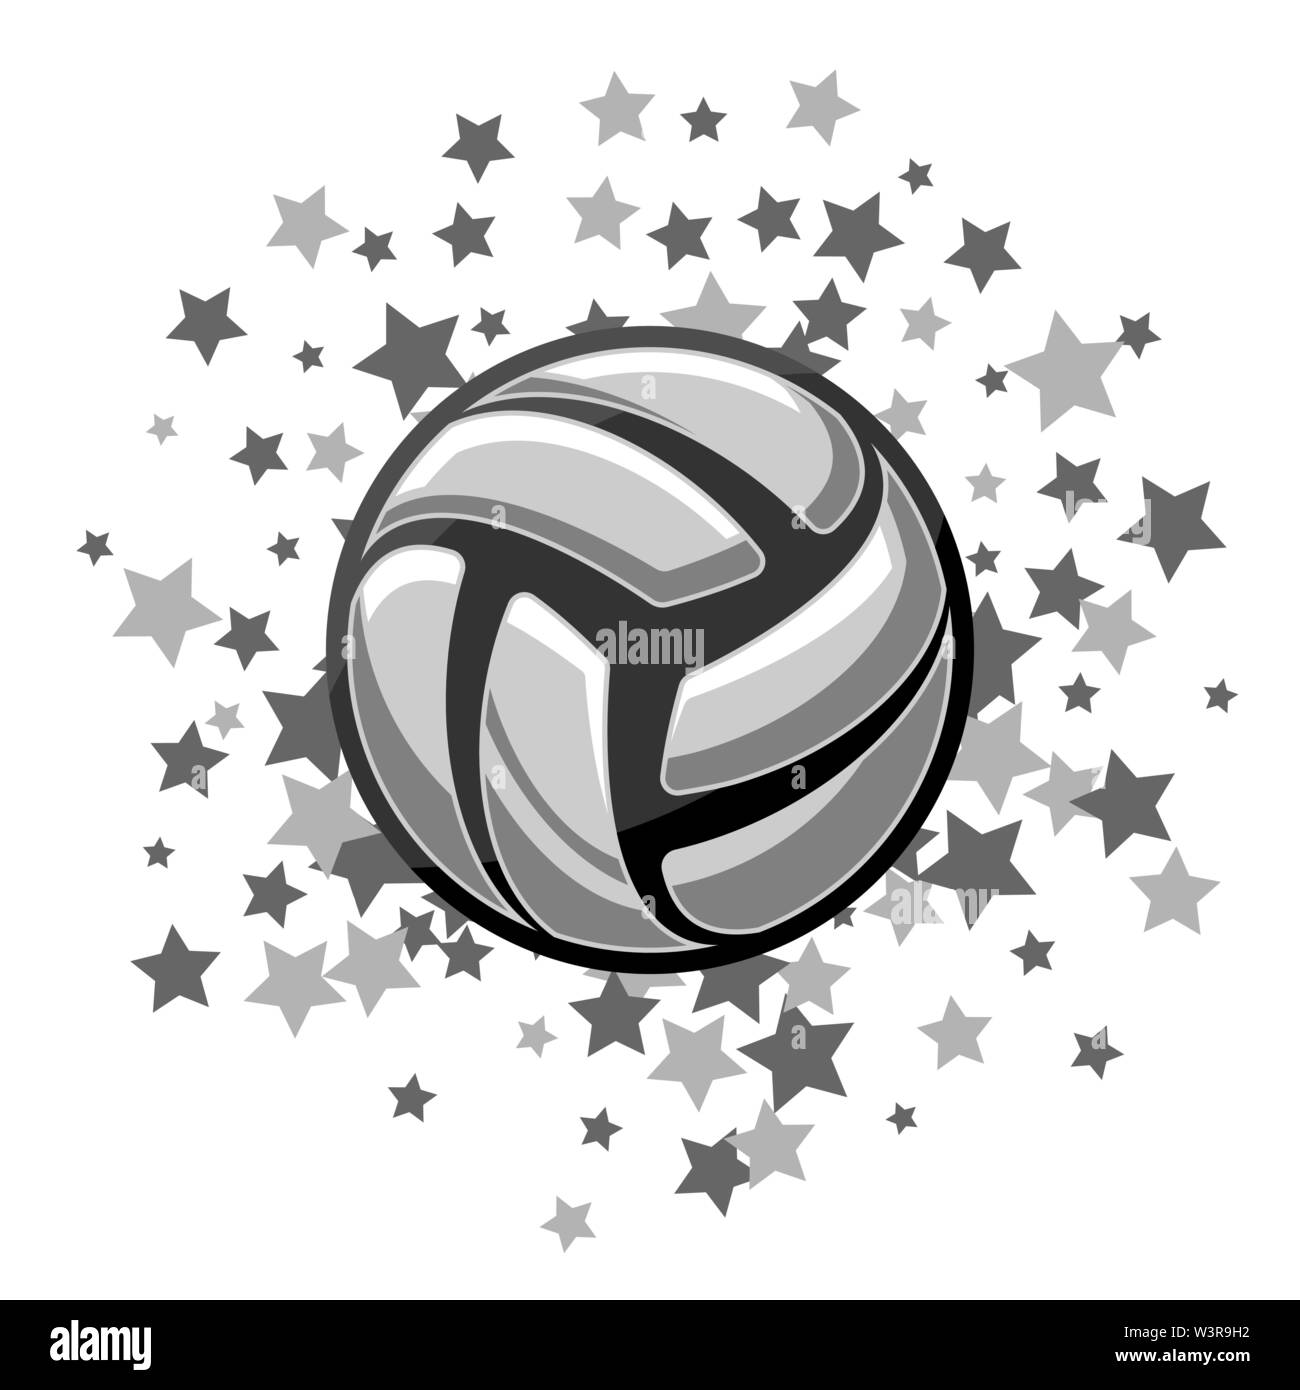 Volleyball silhouette with different stars firework isolated on white background Stock Vector